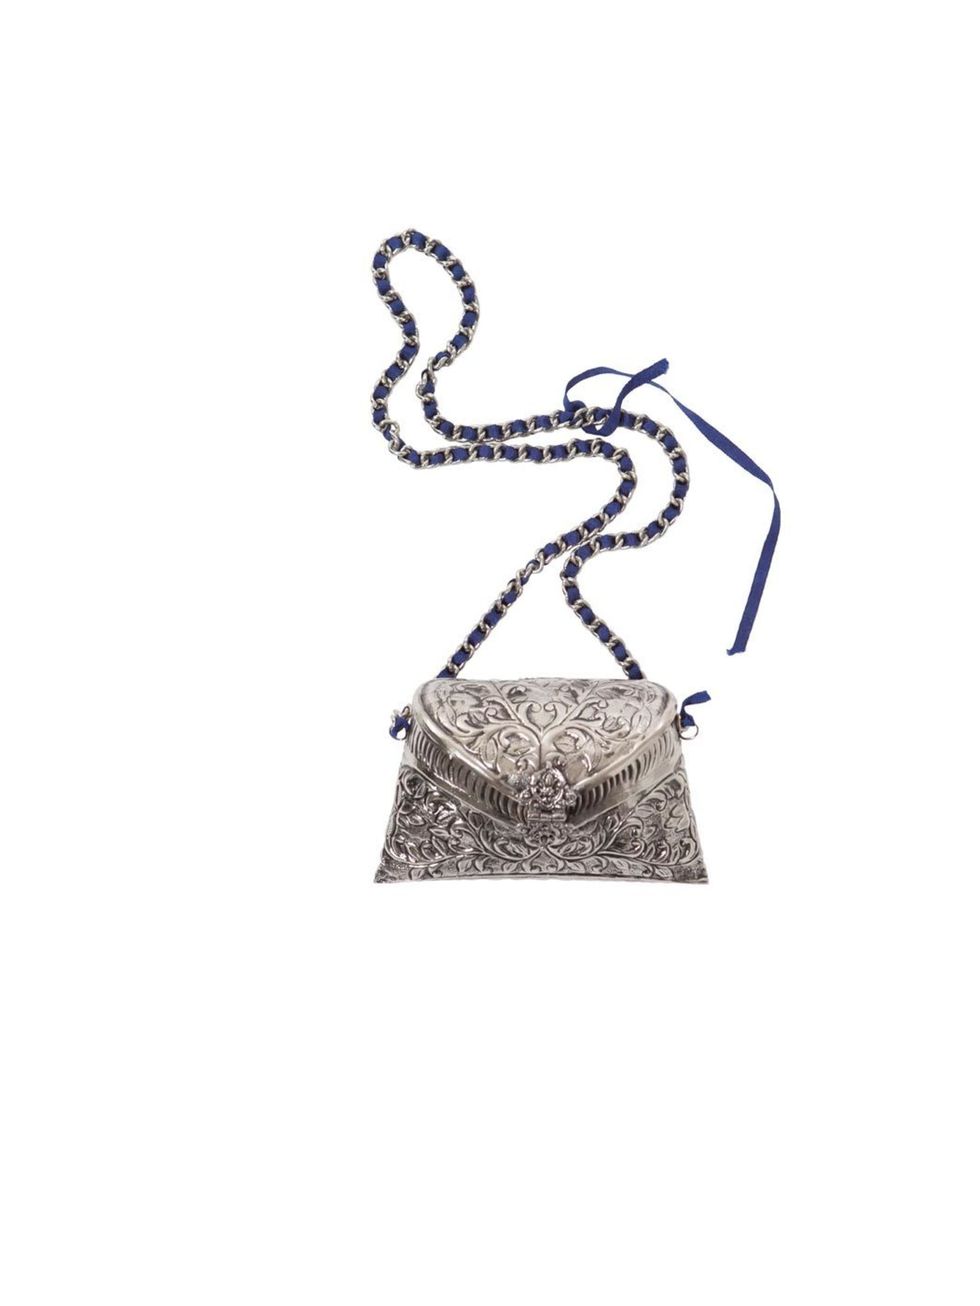 <p>Zara chain strap bag, £39.99, for stockists call 0207 534 9500</p>